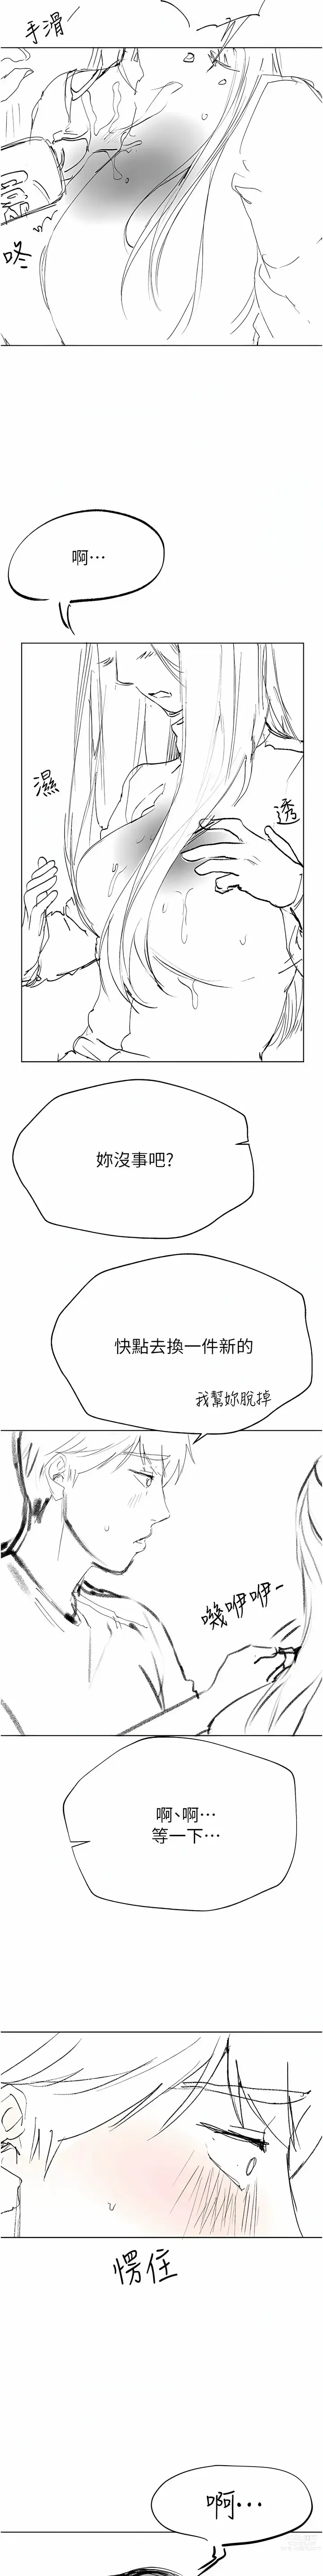 Page 1945 of manga 姐姐们的调教／My Sister’s Friends